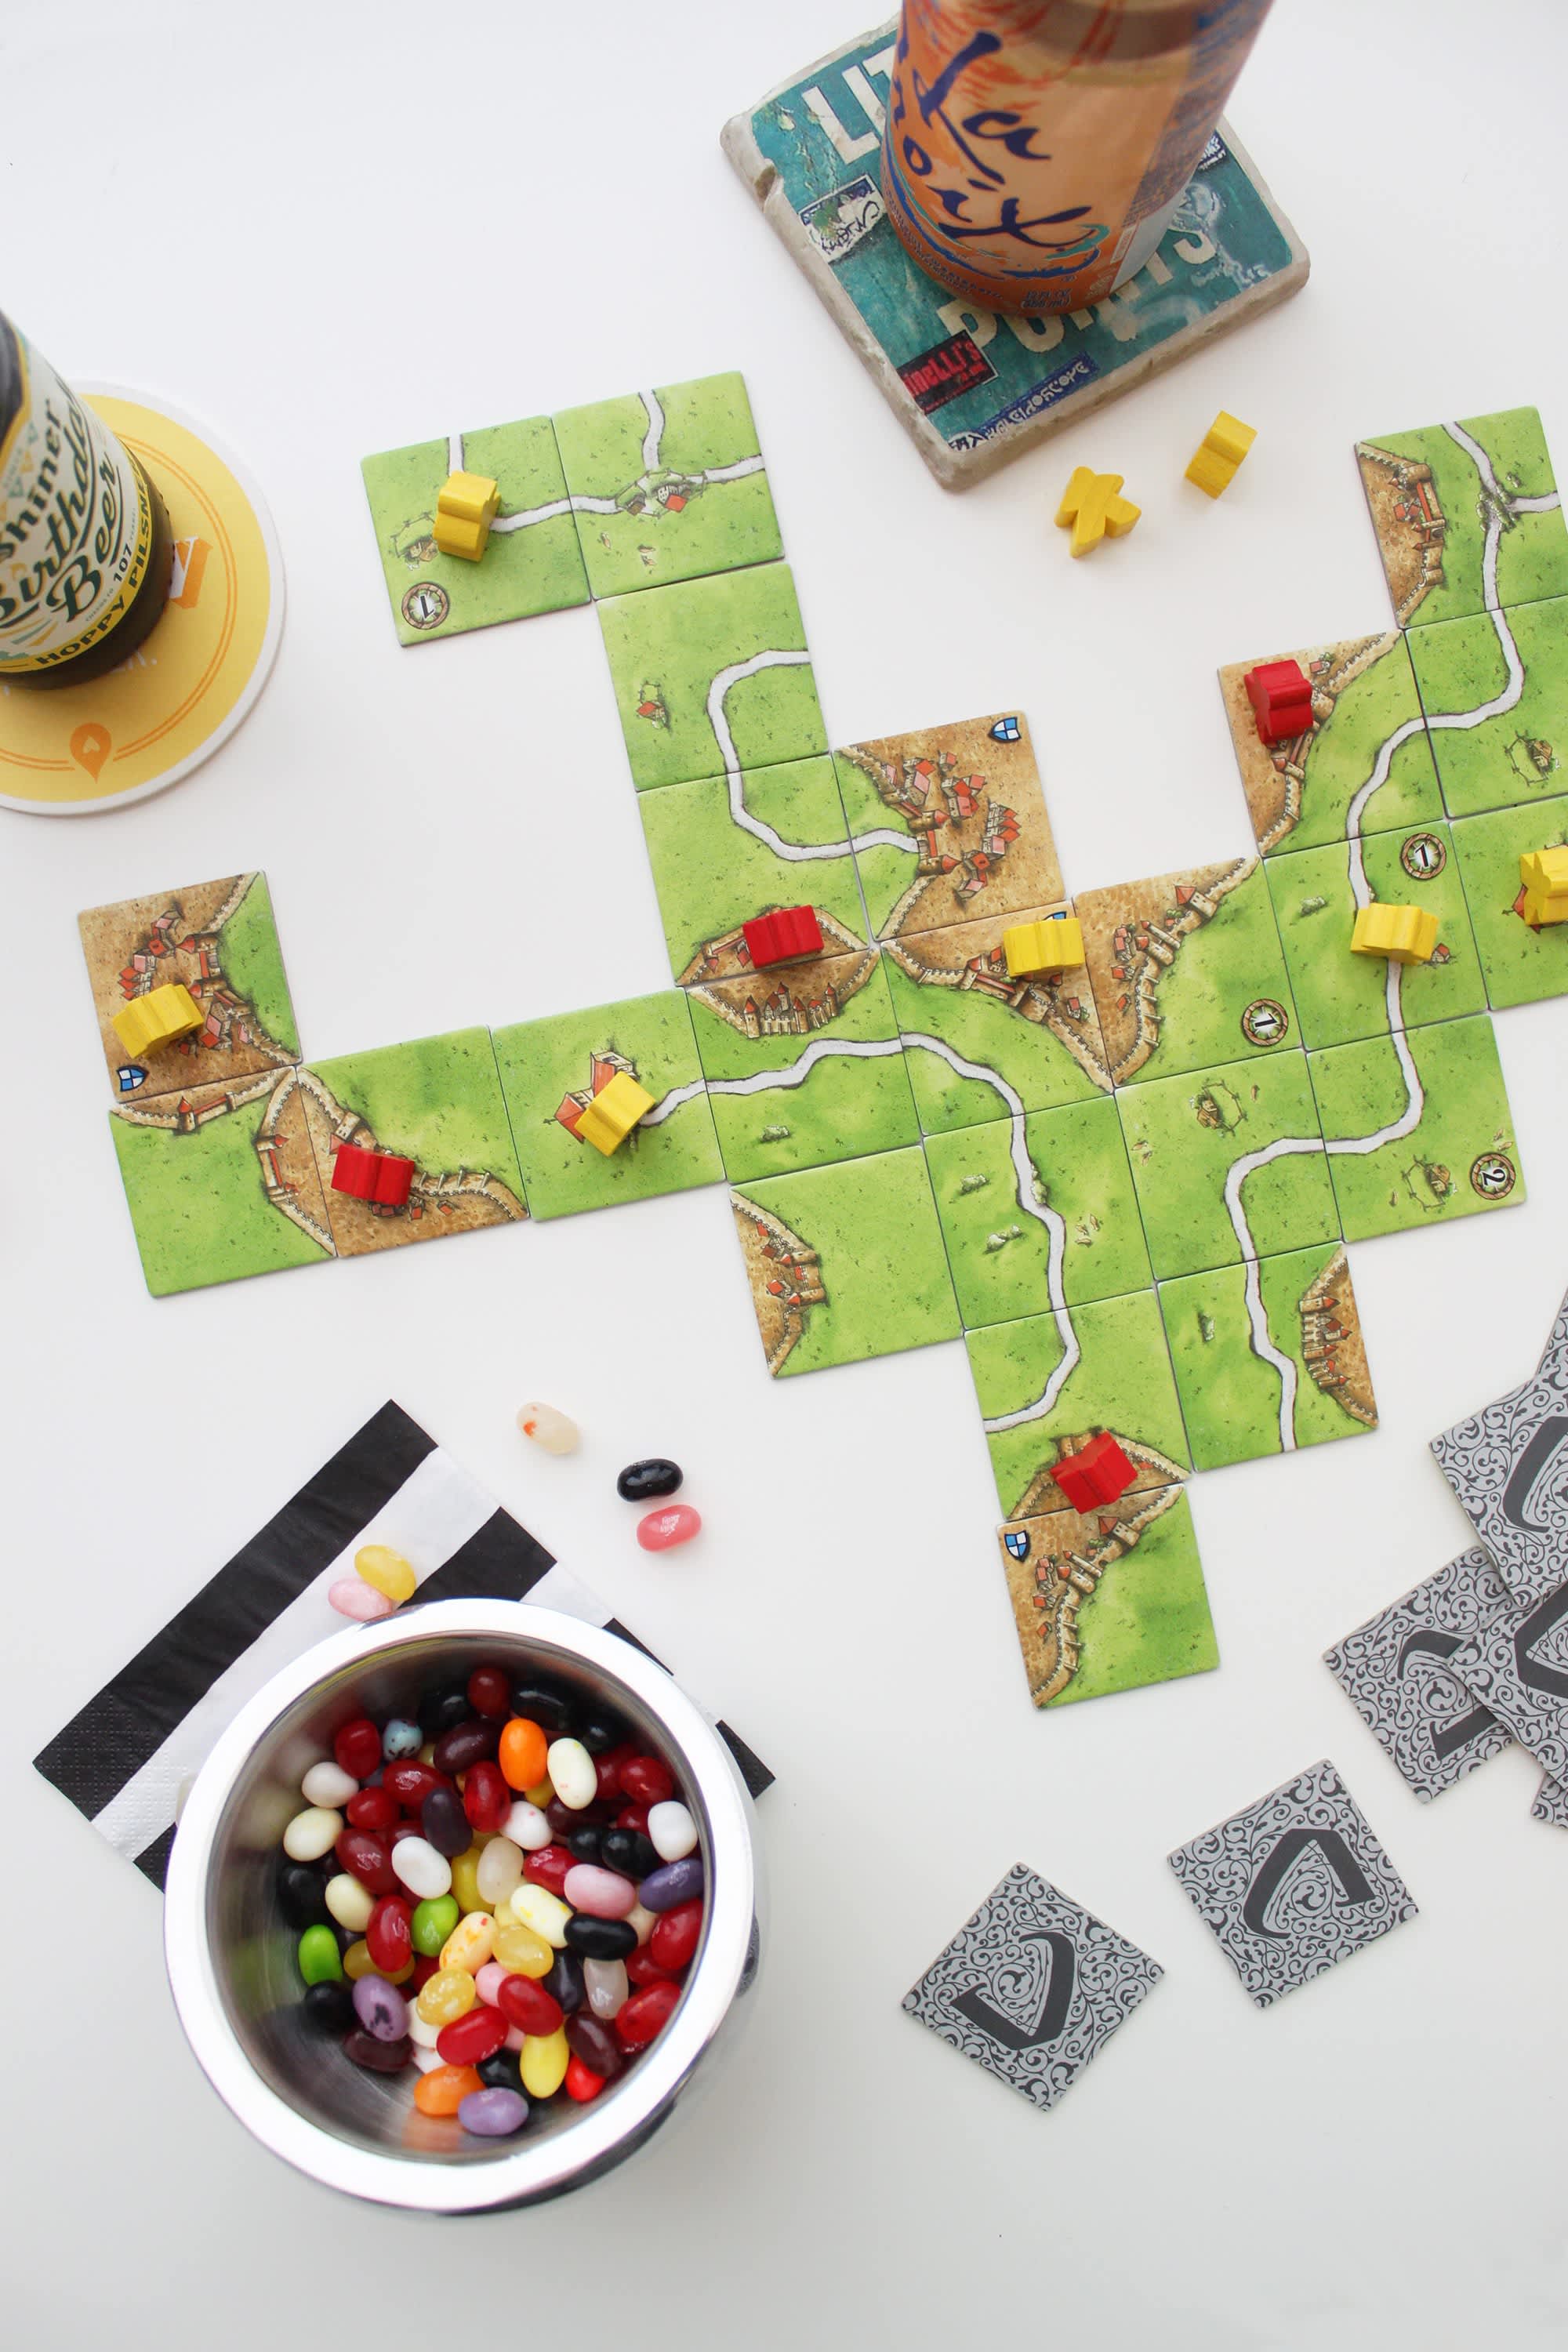 13 Games You Can Play at Home With Just Two People | Apartment Therapy